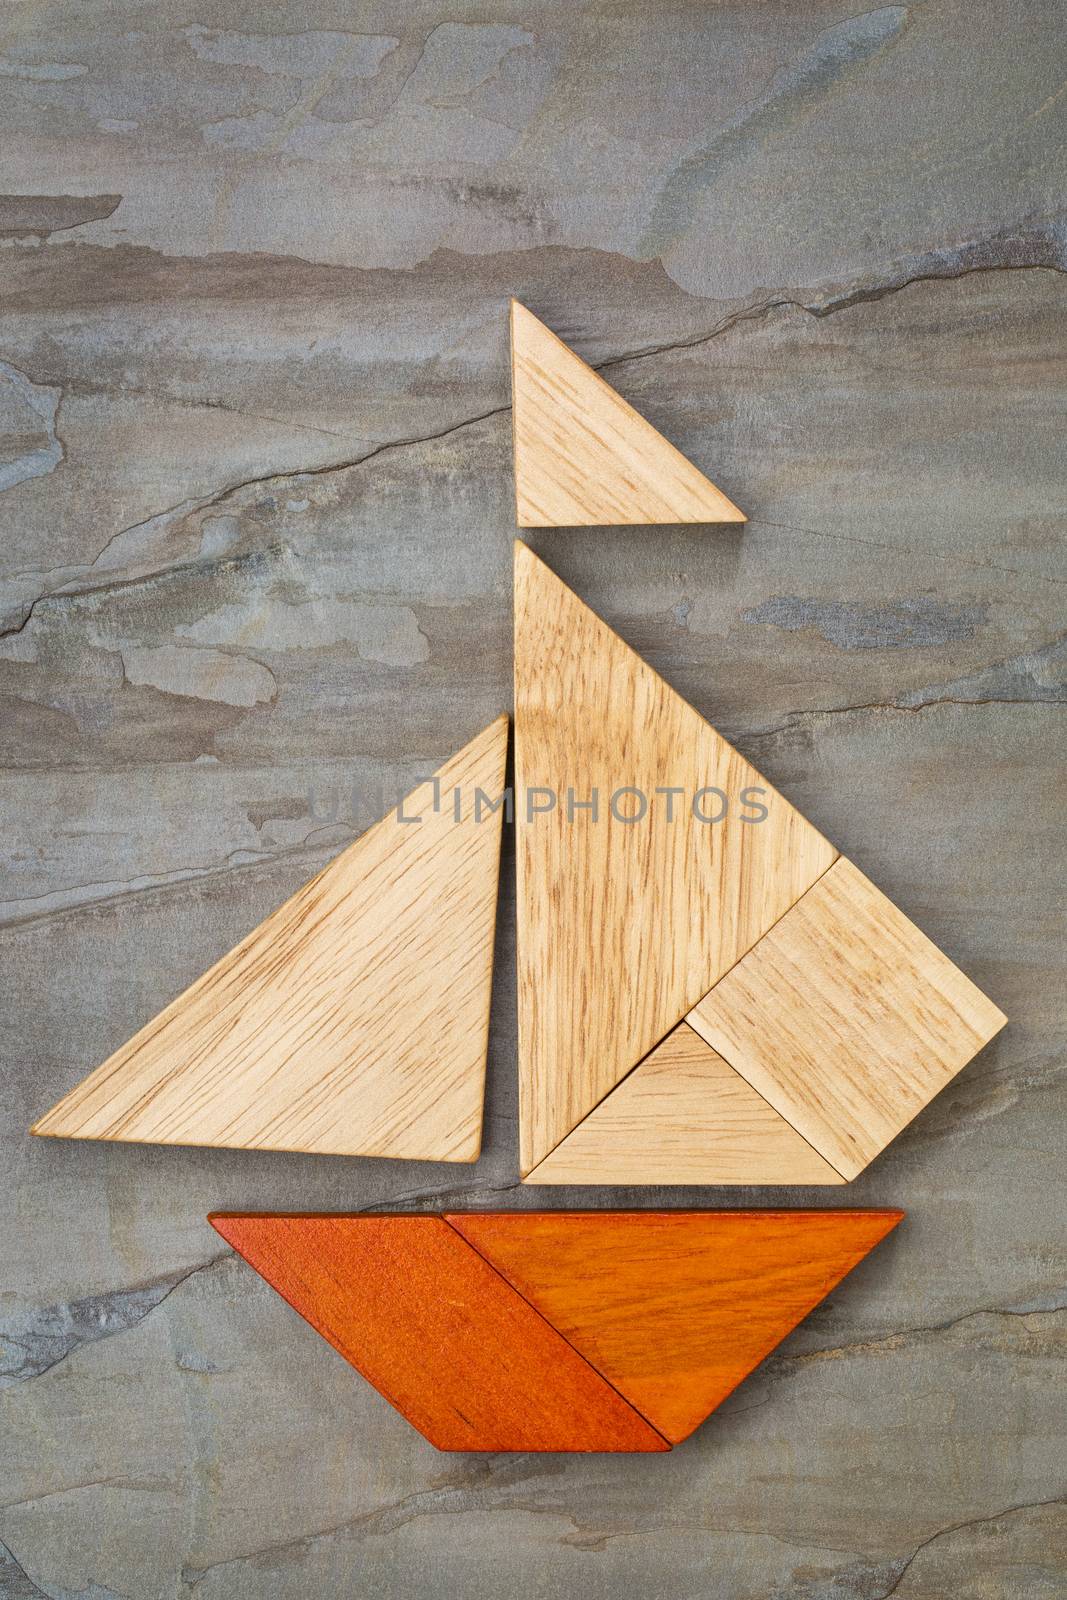 abstract picture of a sailing boat built from seven tangram wooden pieces over a slate rock background, artwork created by the photographer